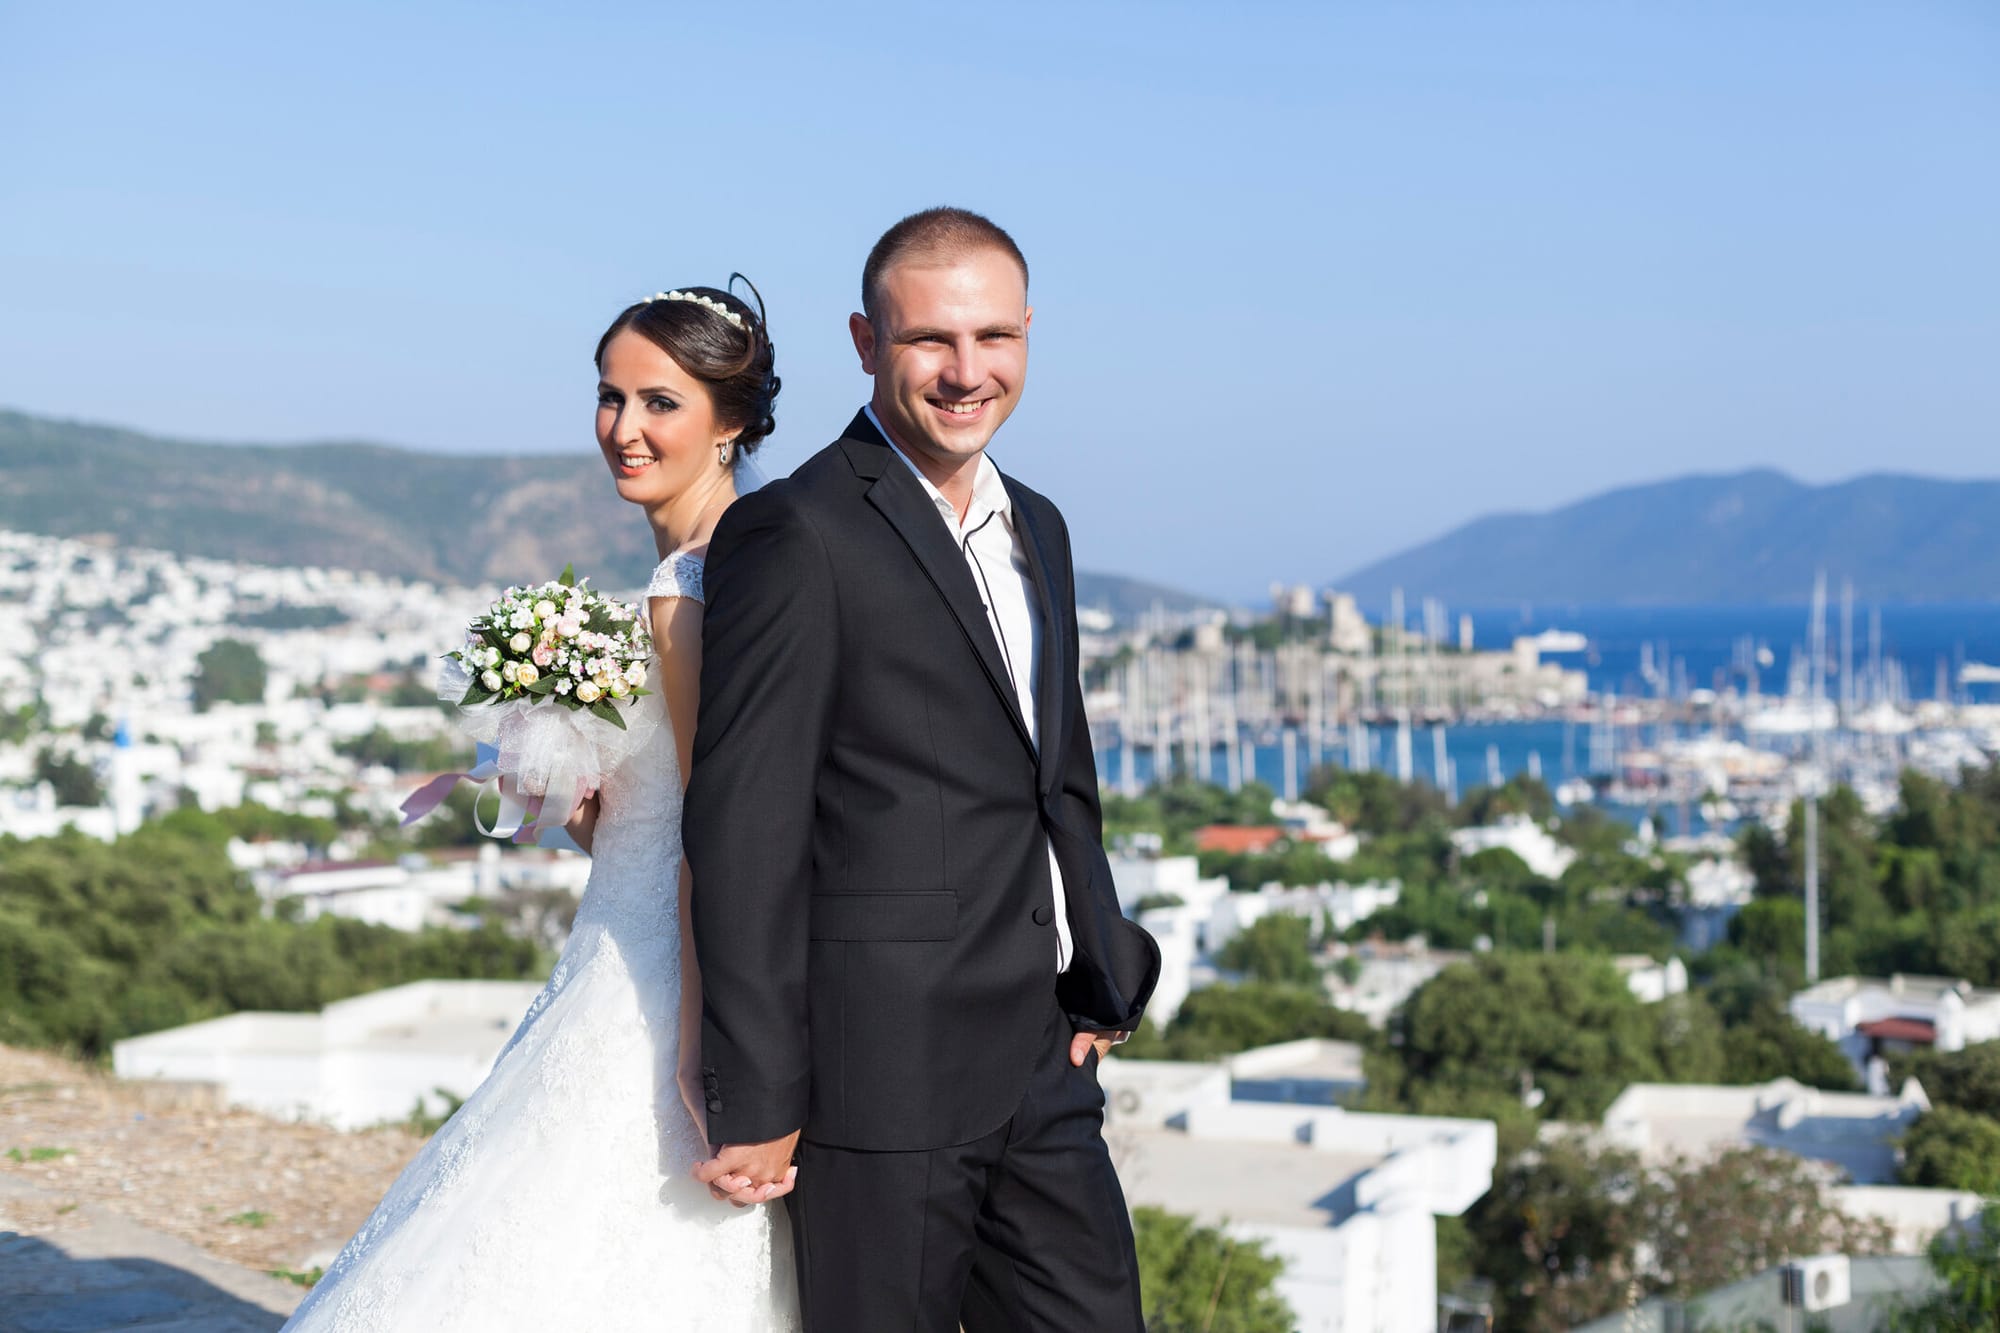 Getting Married in Turkey: A Complete Guide